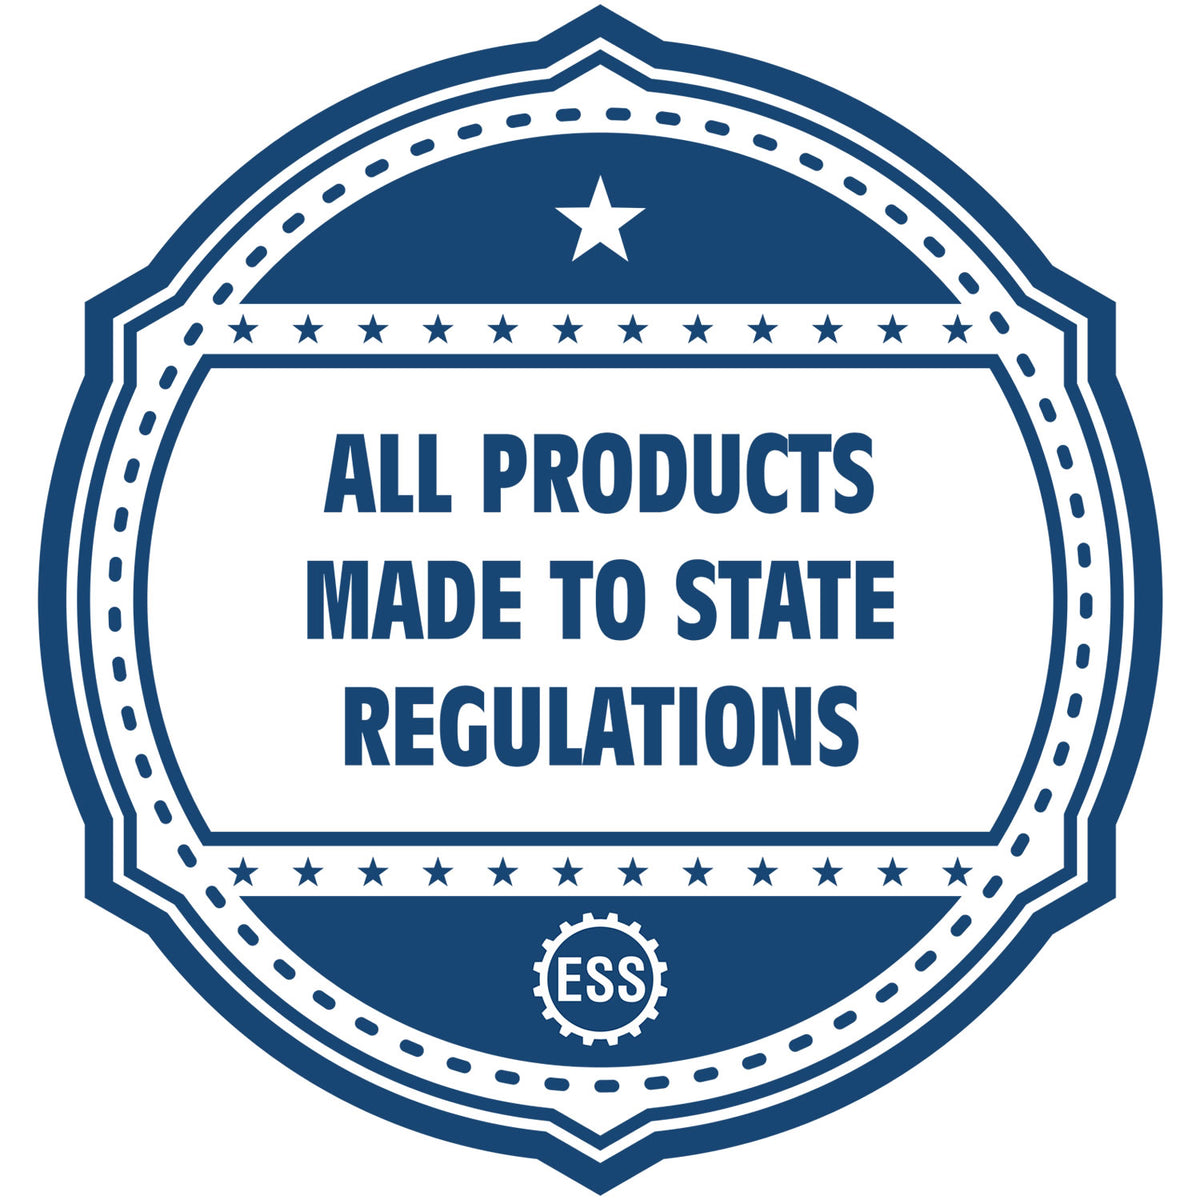 A blue icon or badge for the Gift Texas Geologist Seal showing that this product is made in compliance with state regulations.